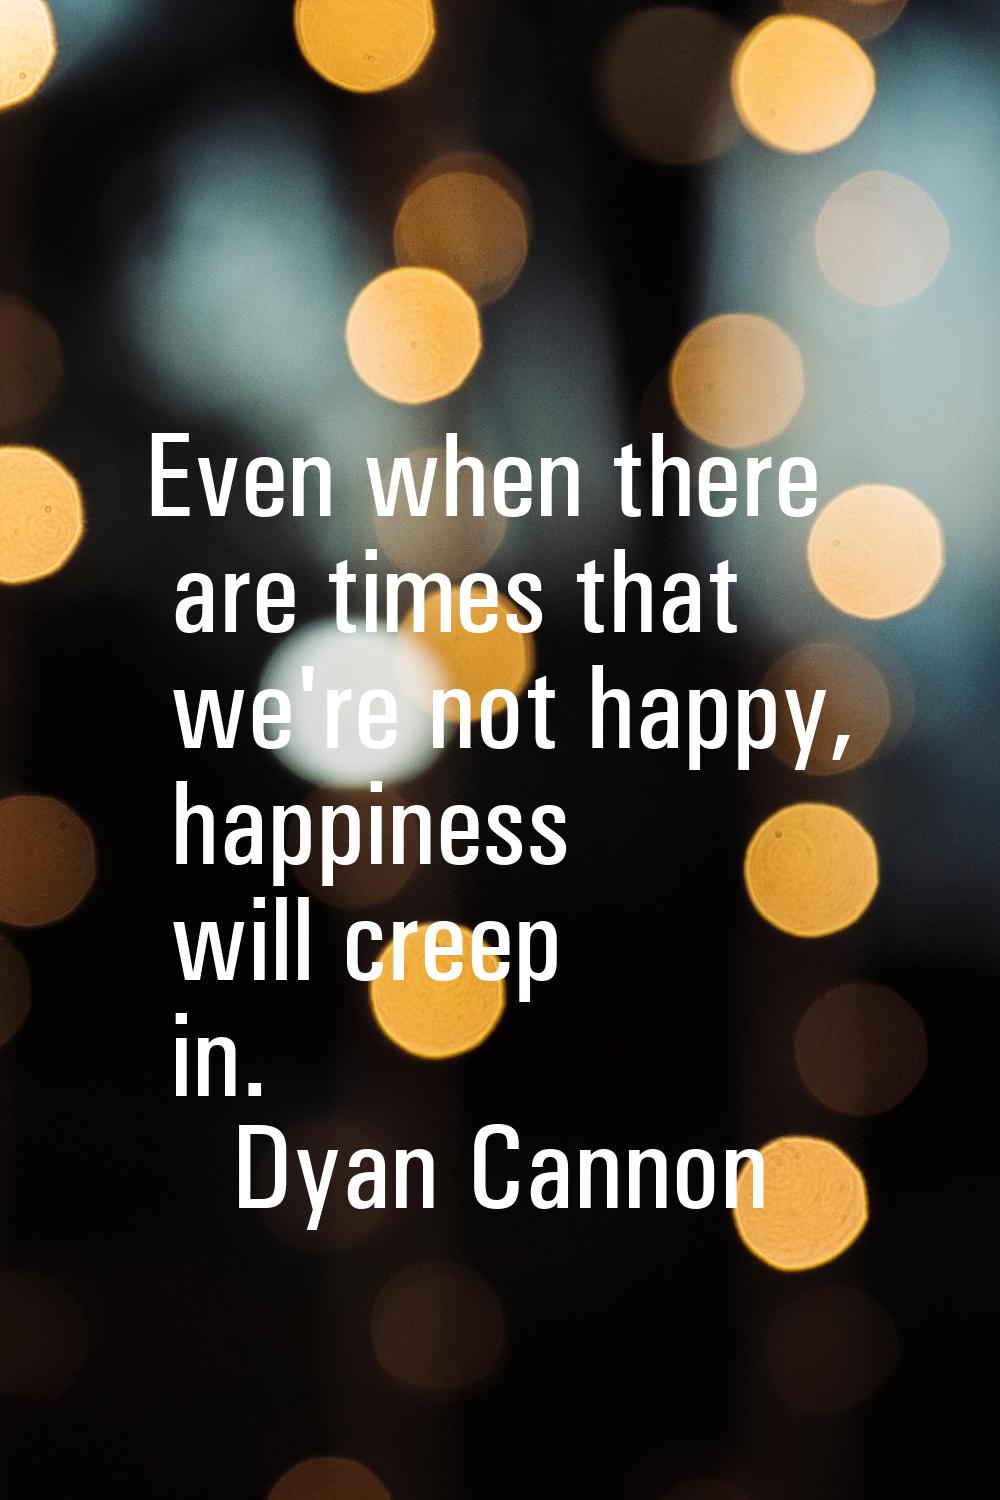 Even when there are times that we're not happy, happiness will creep in.